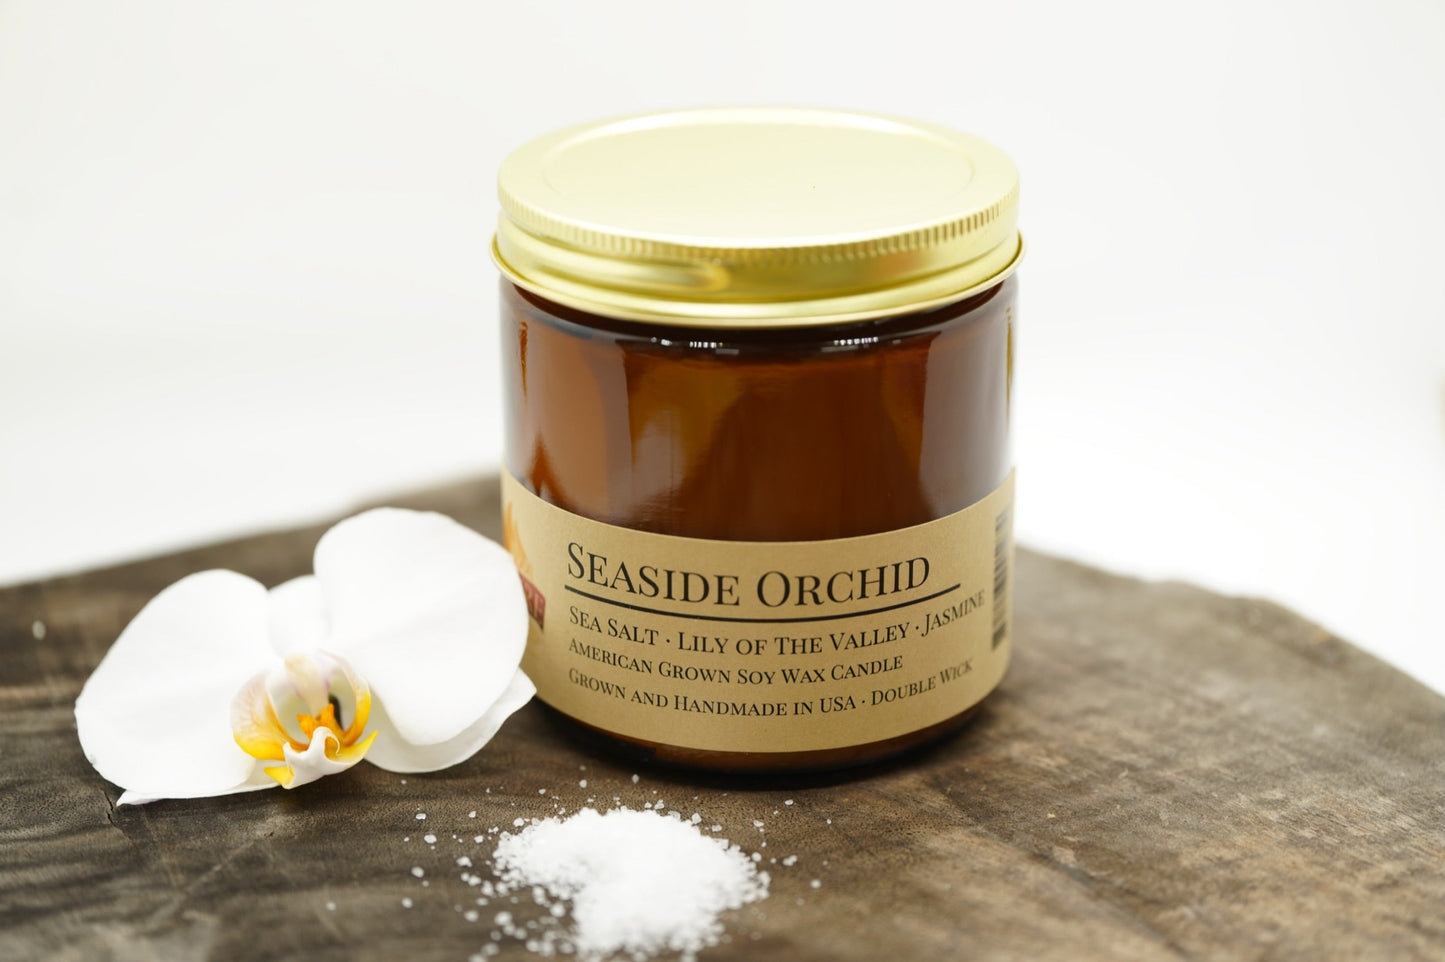 Seaside Orchid Soy Candle | 16 oz Double Wick Amber Apothecary Jar